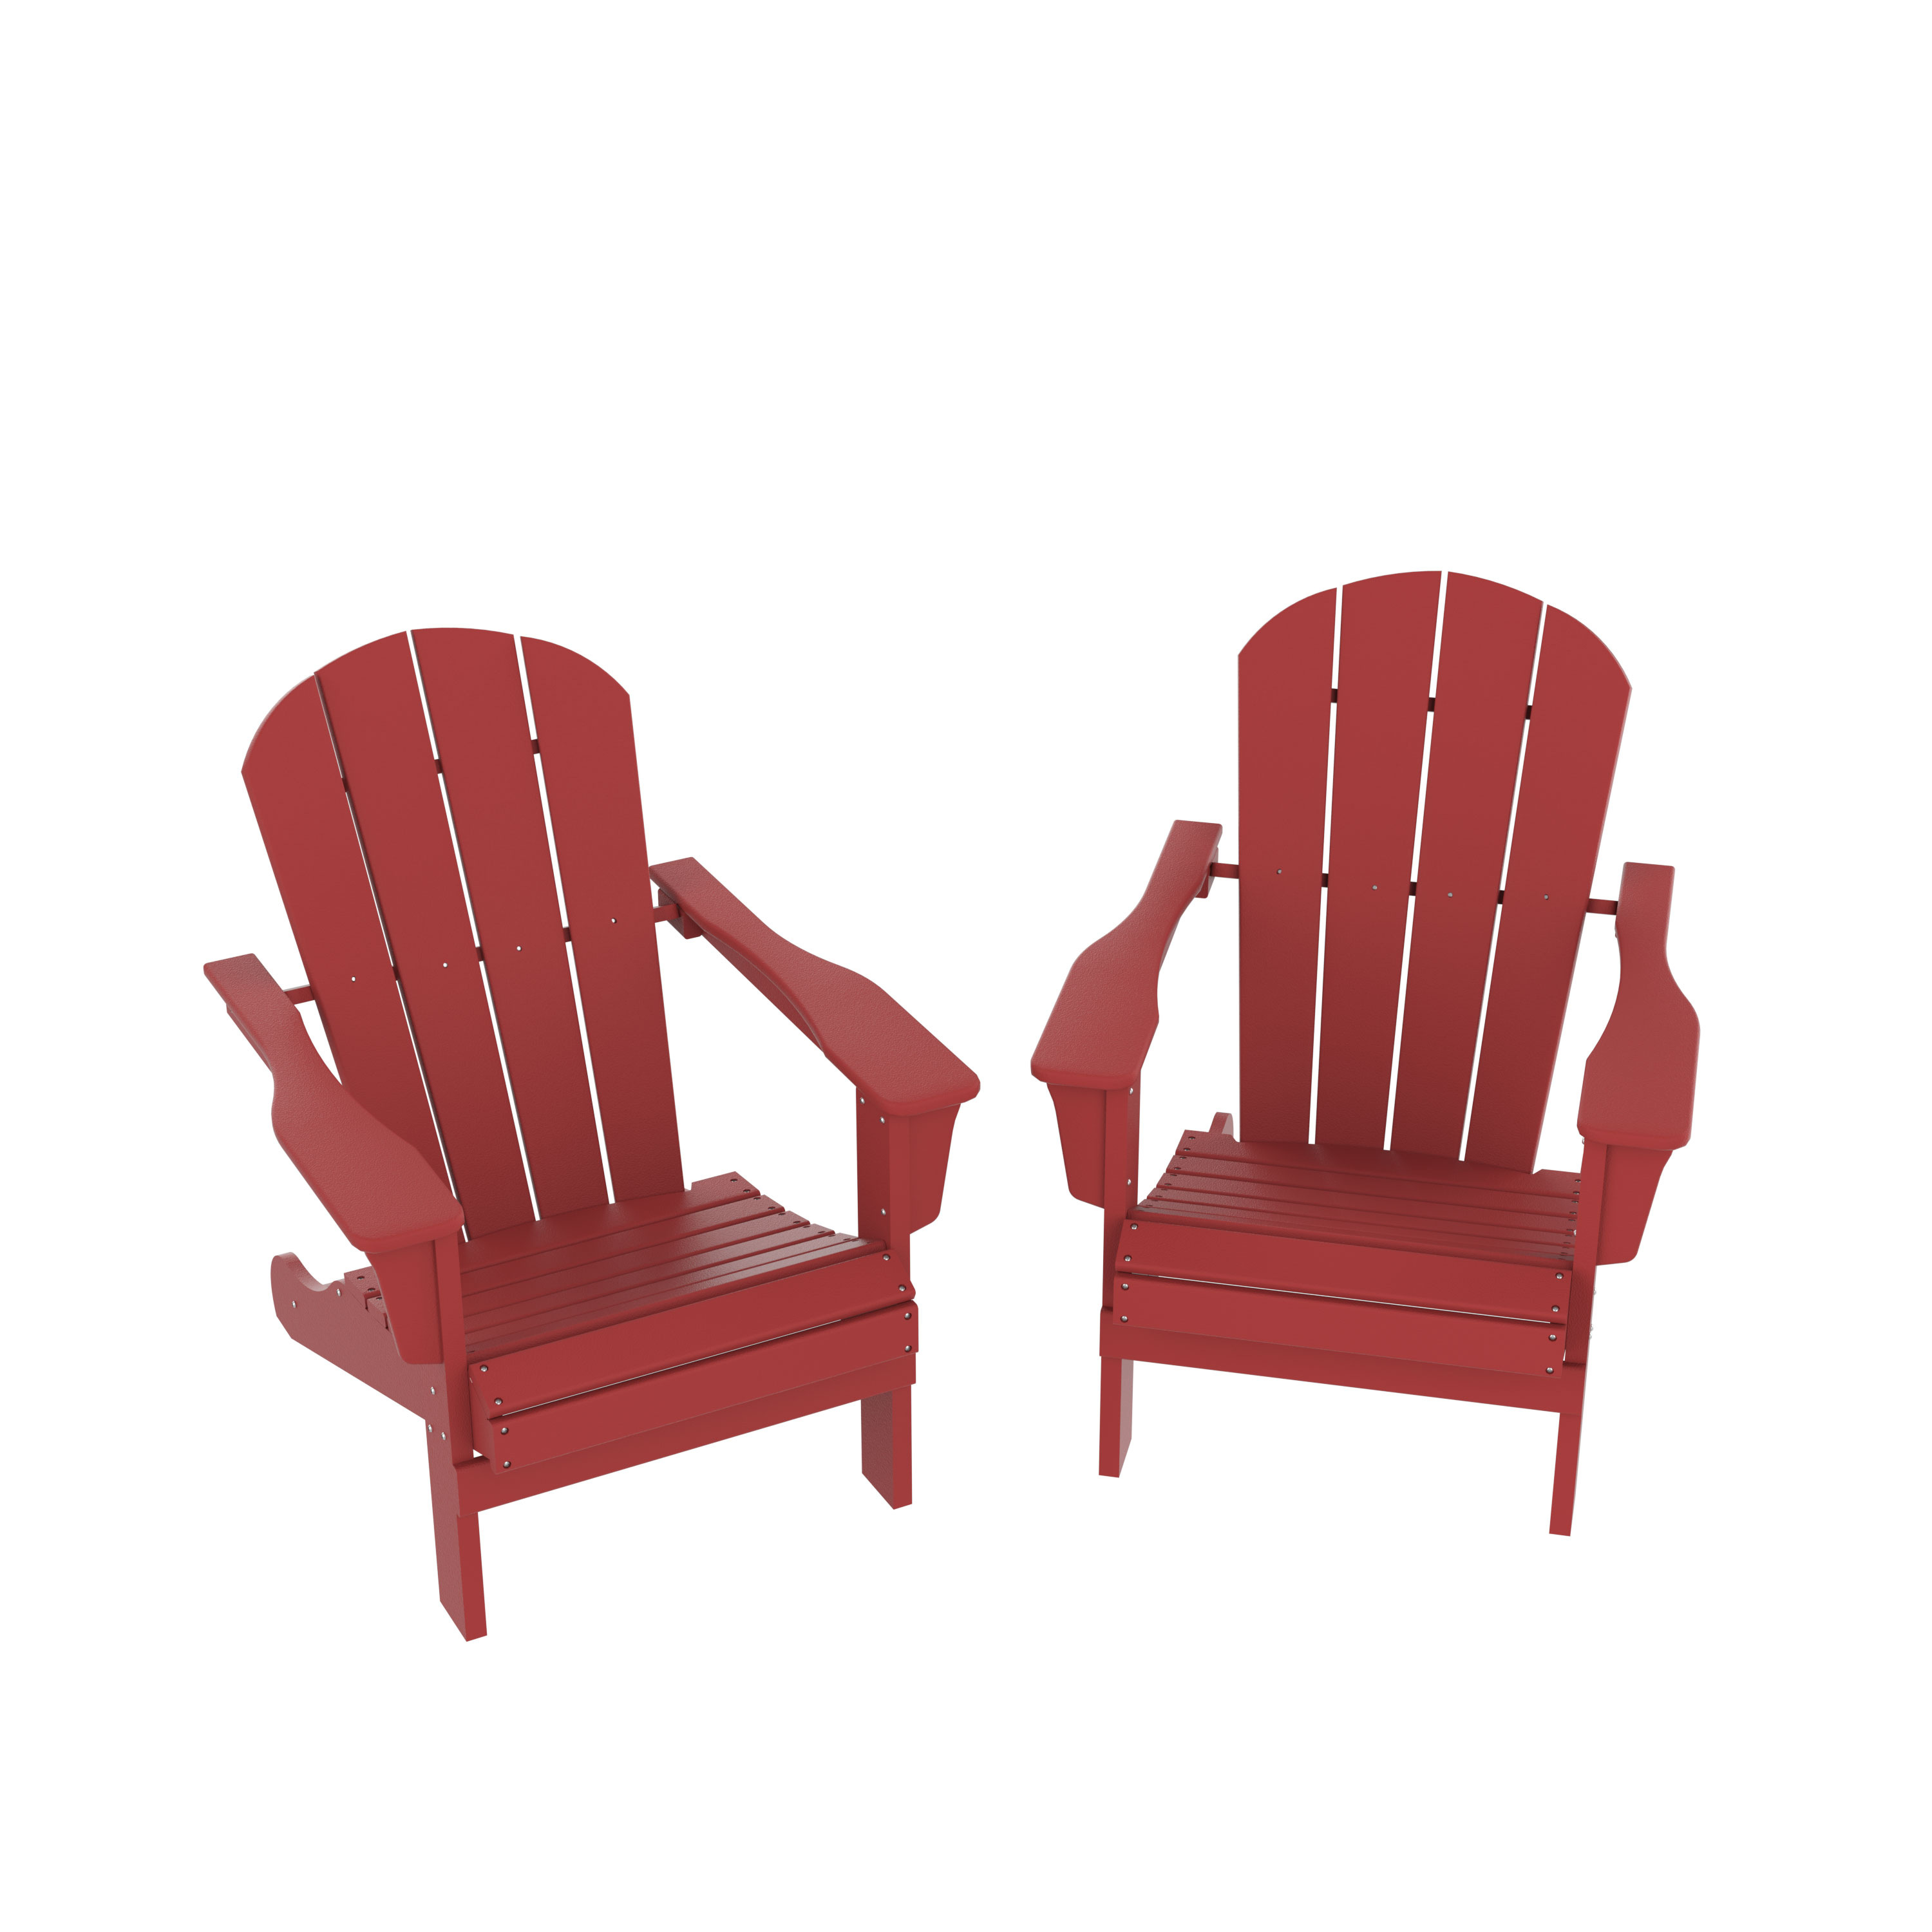 Clearance! HDPE Adirondack Chair, Fire Pit Chairs, Sand Chair, Patio Outdoor Chairs,DPE Plastic Resin Deck Chair, lawn chairs, Adult Size ,Weather Resistant for Patio/ Backyard/Garden, Red, Set of 2 - image 4 of 6